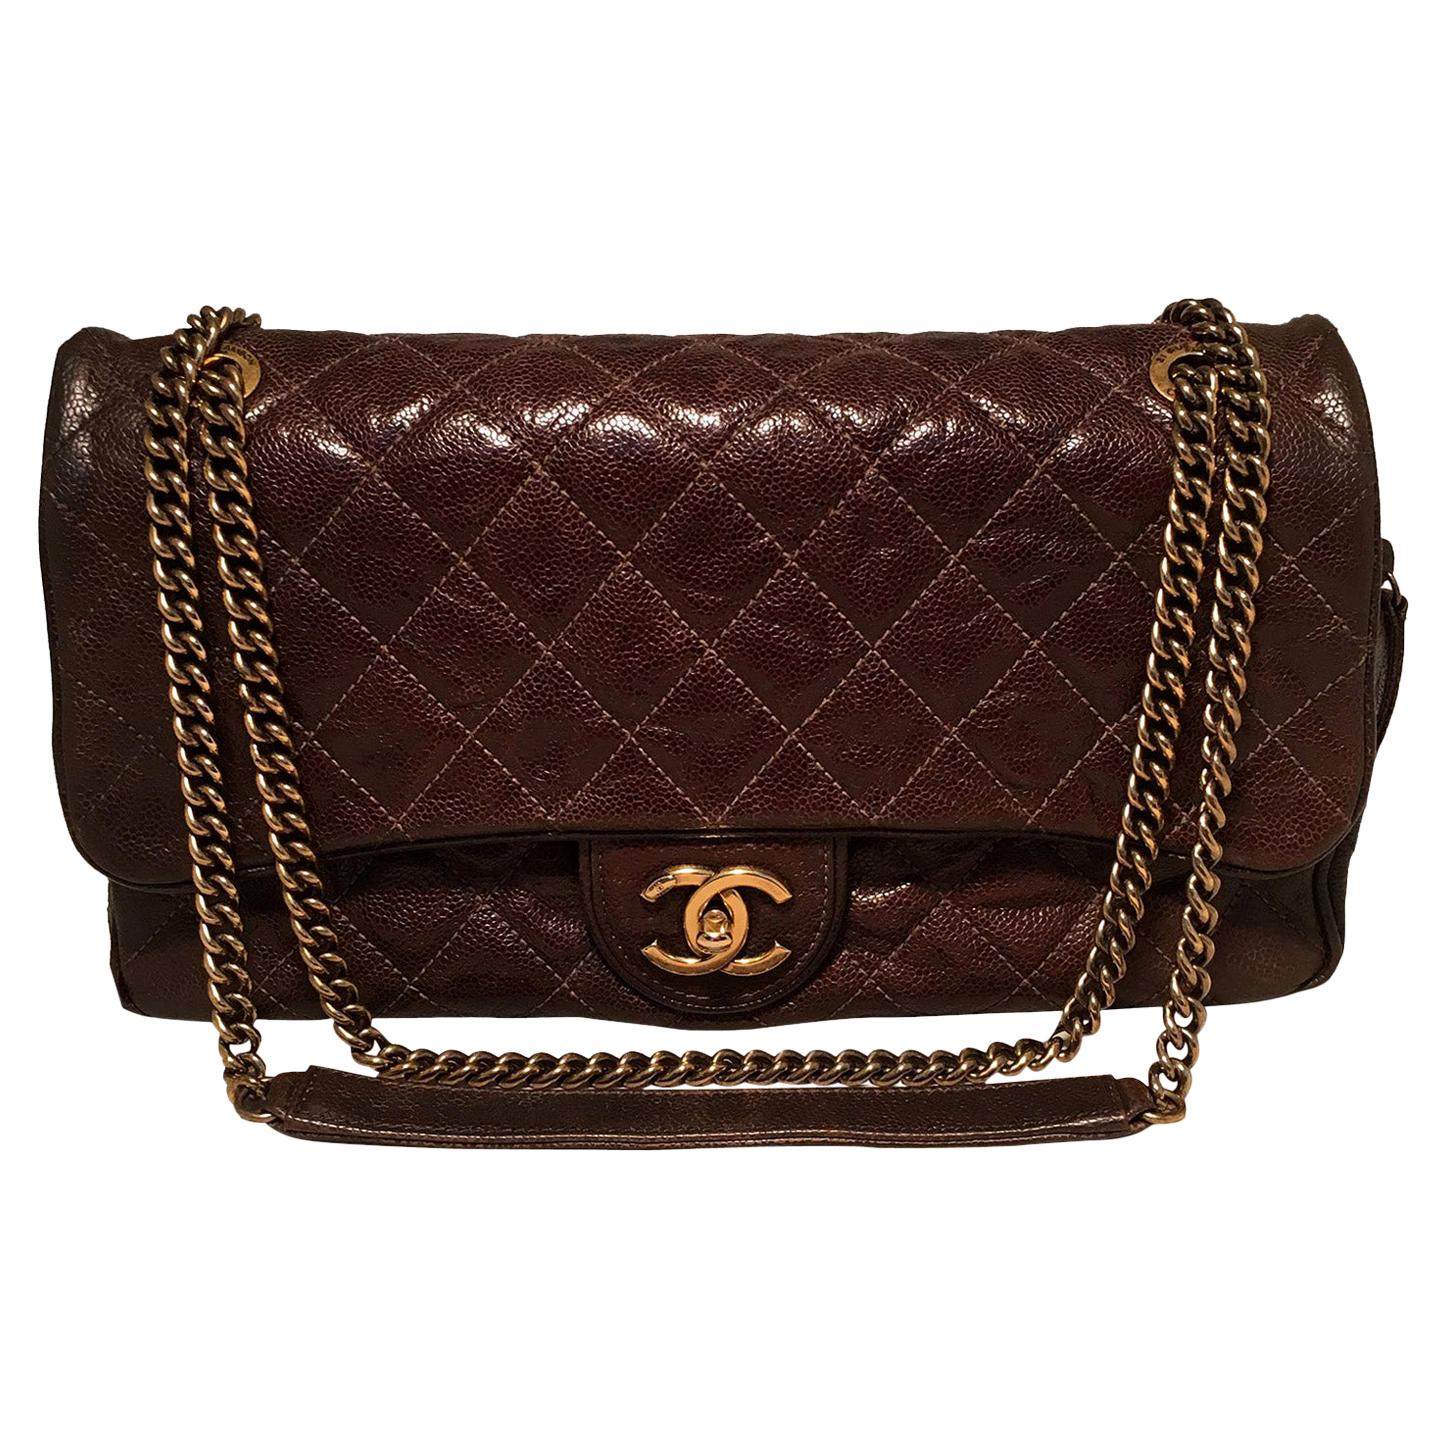 Chanel Brown Distressed Caviar Leather Quilted Classic Flap Shoulder Bag 